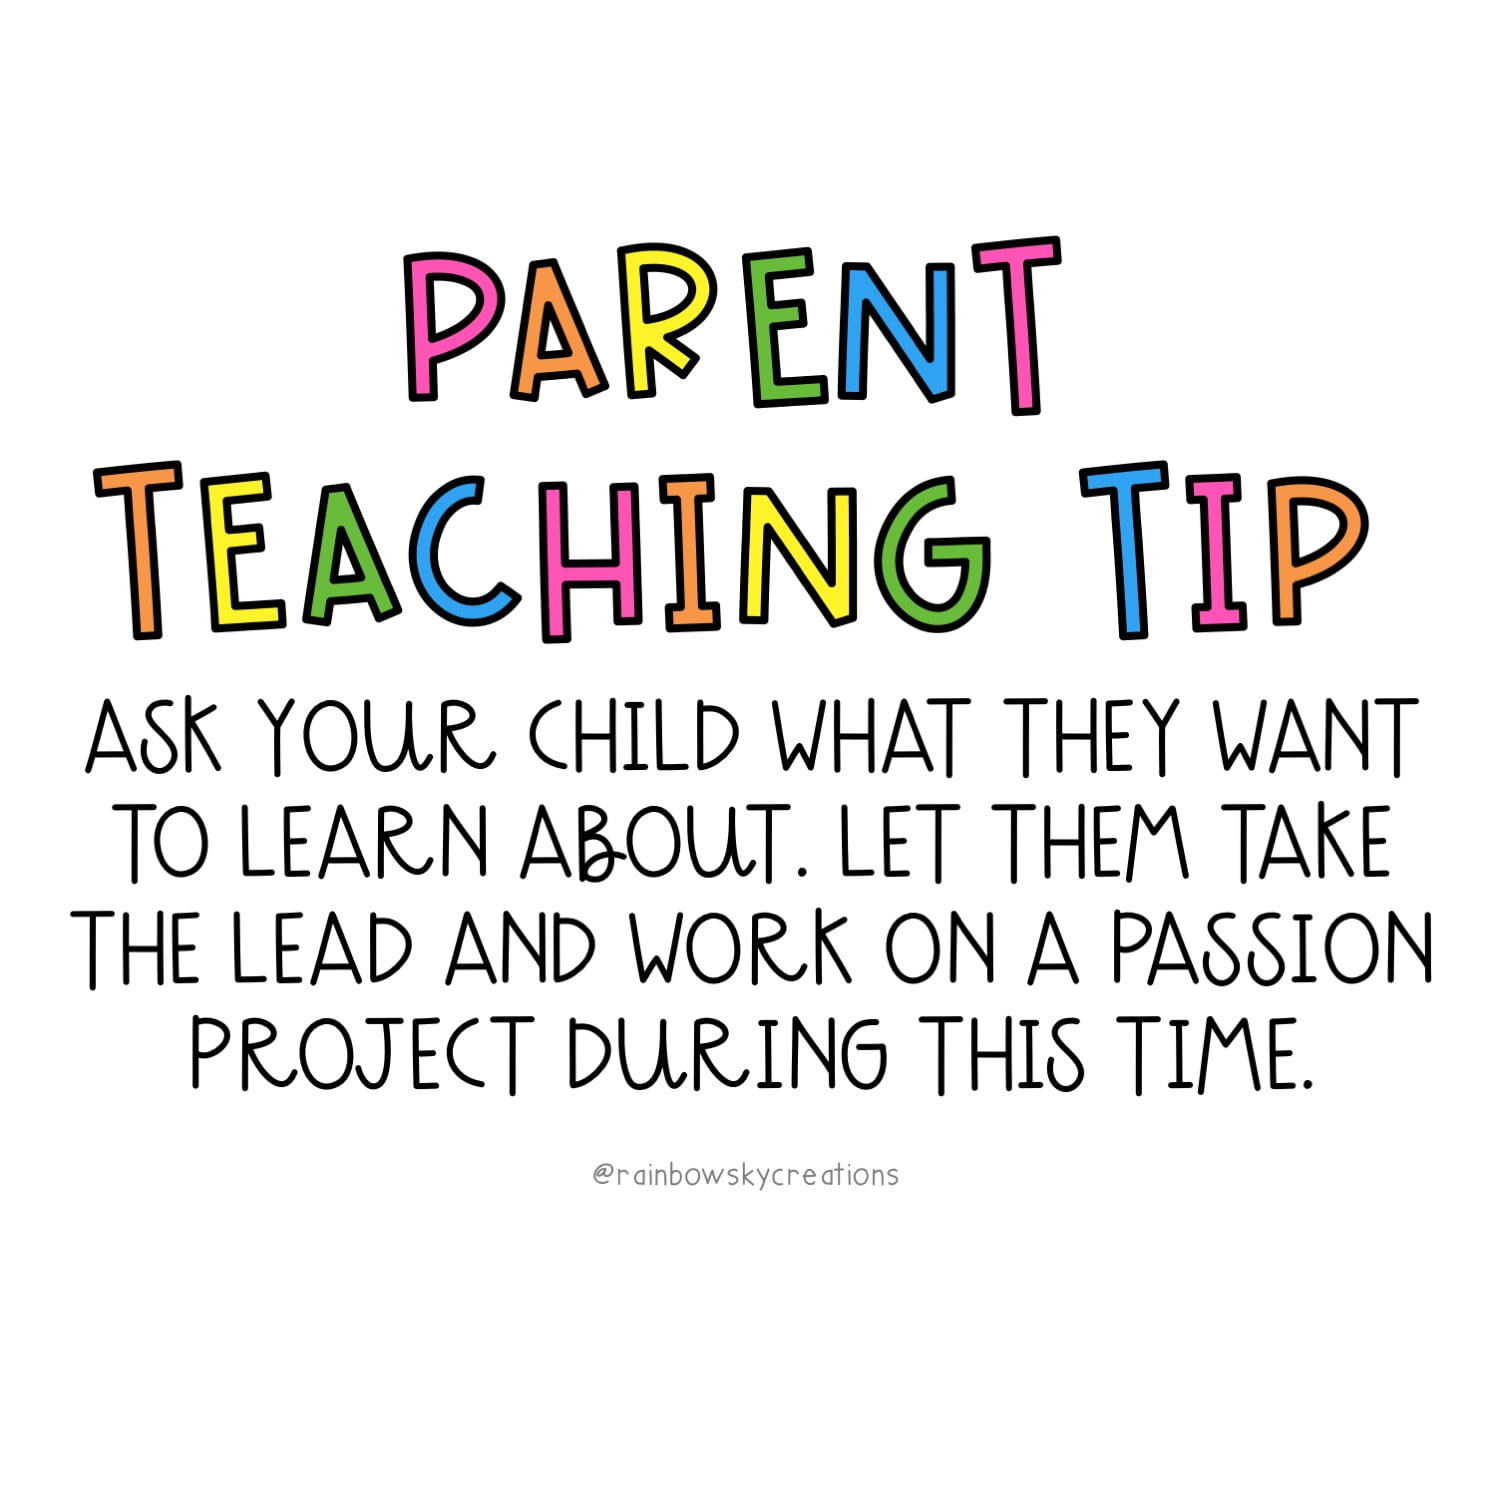 Parent Teaching Tips for Distance Learning - Rainbow Sky Creations